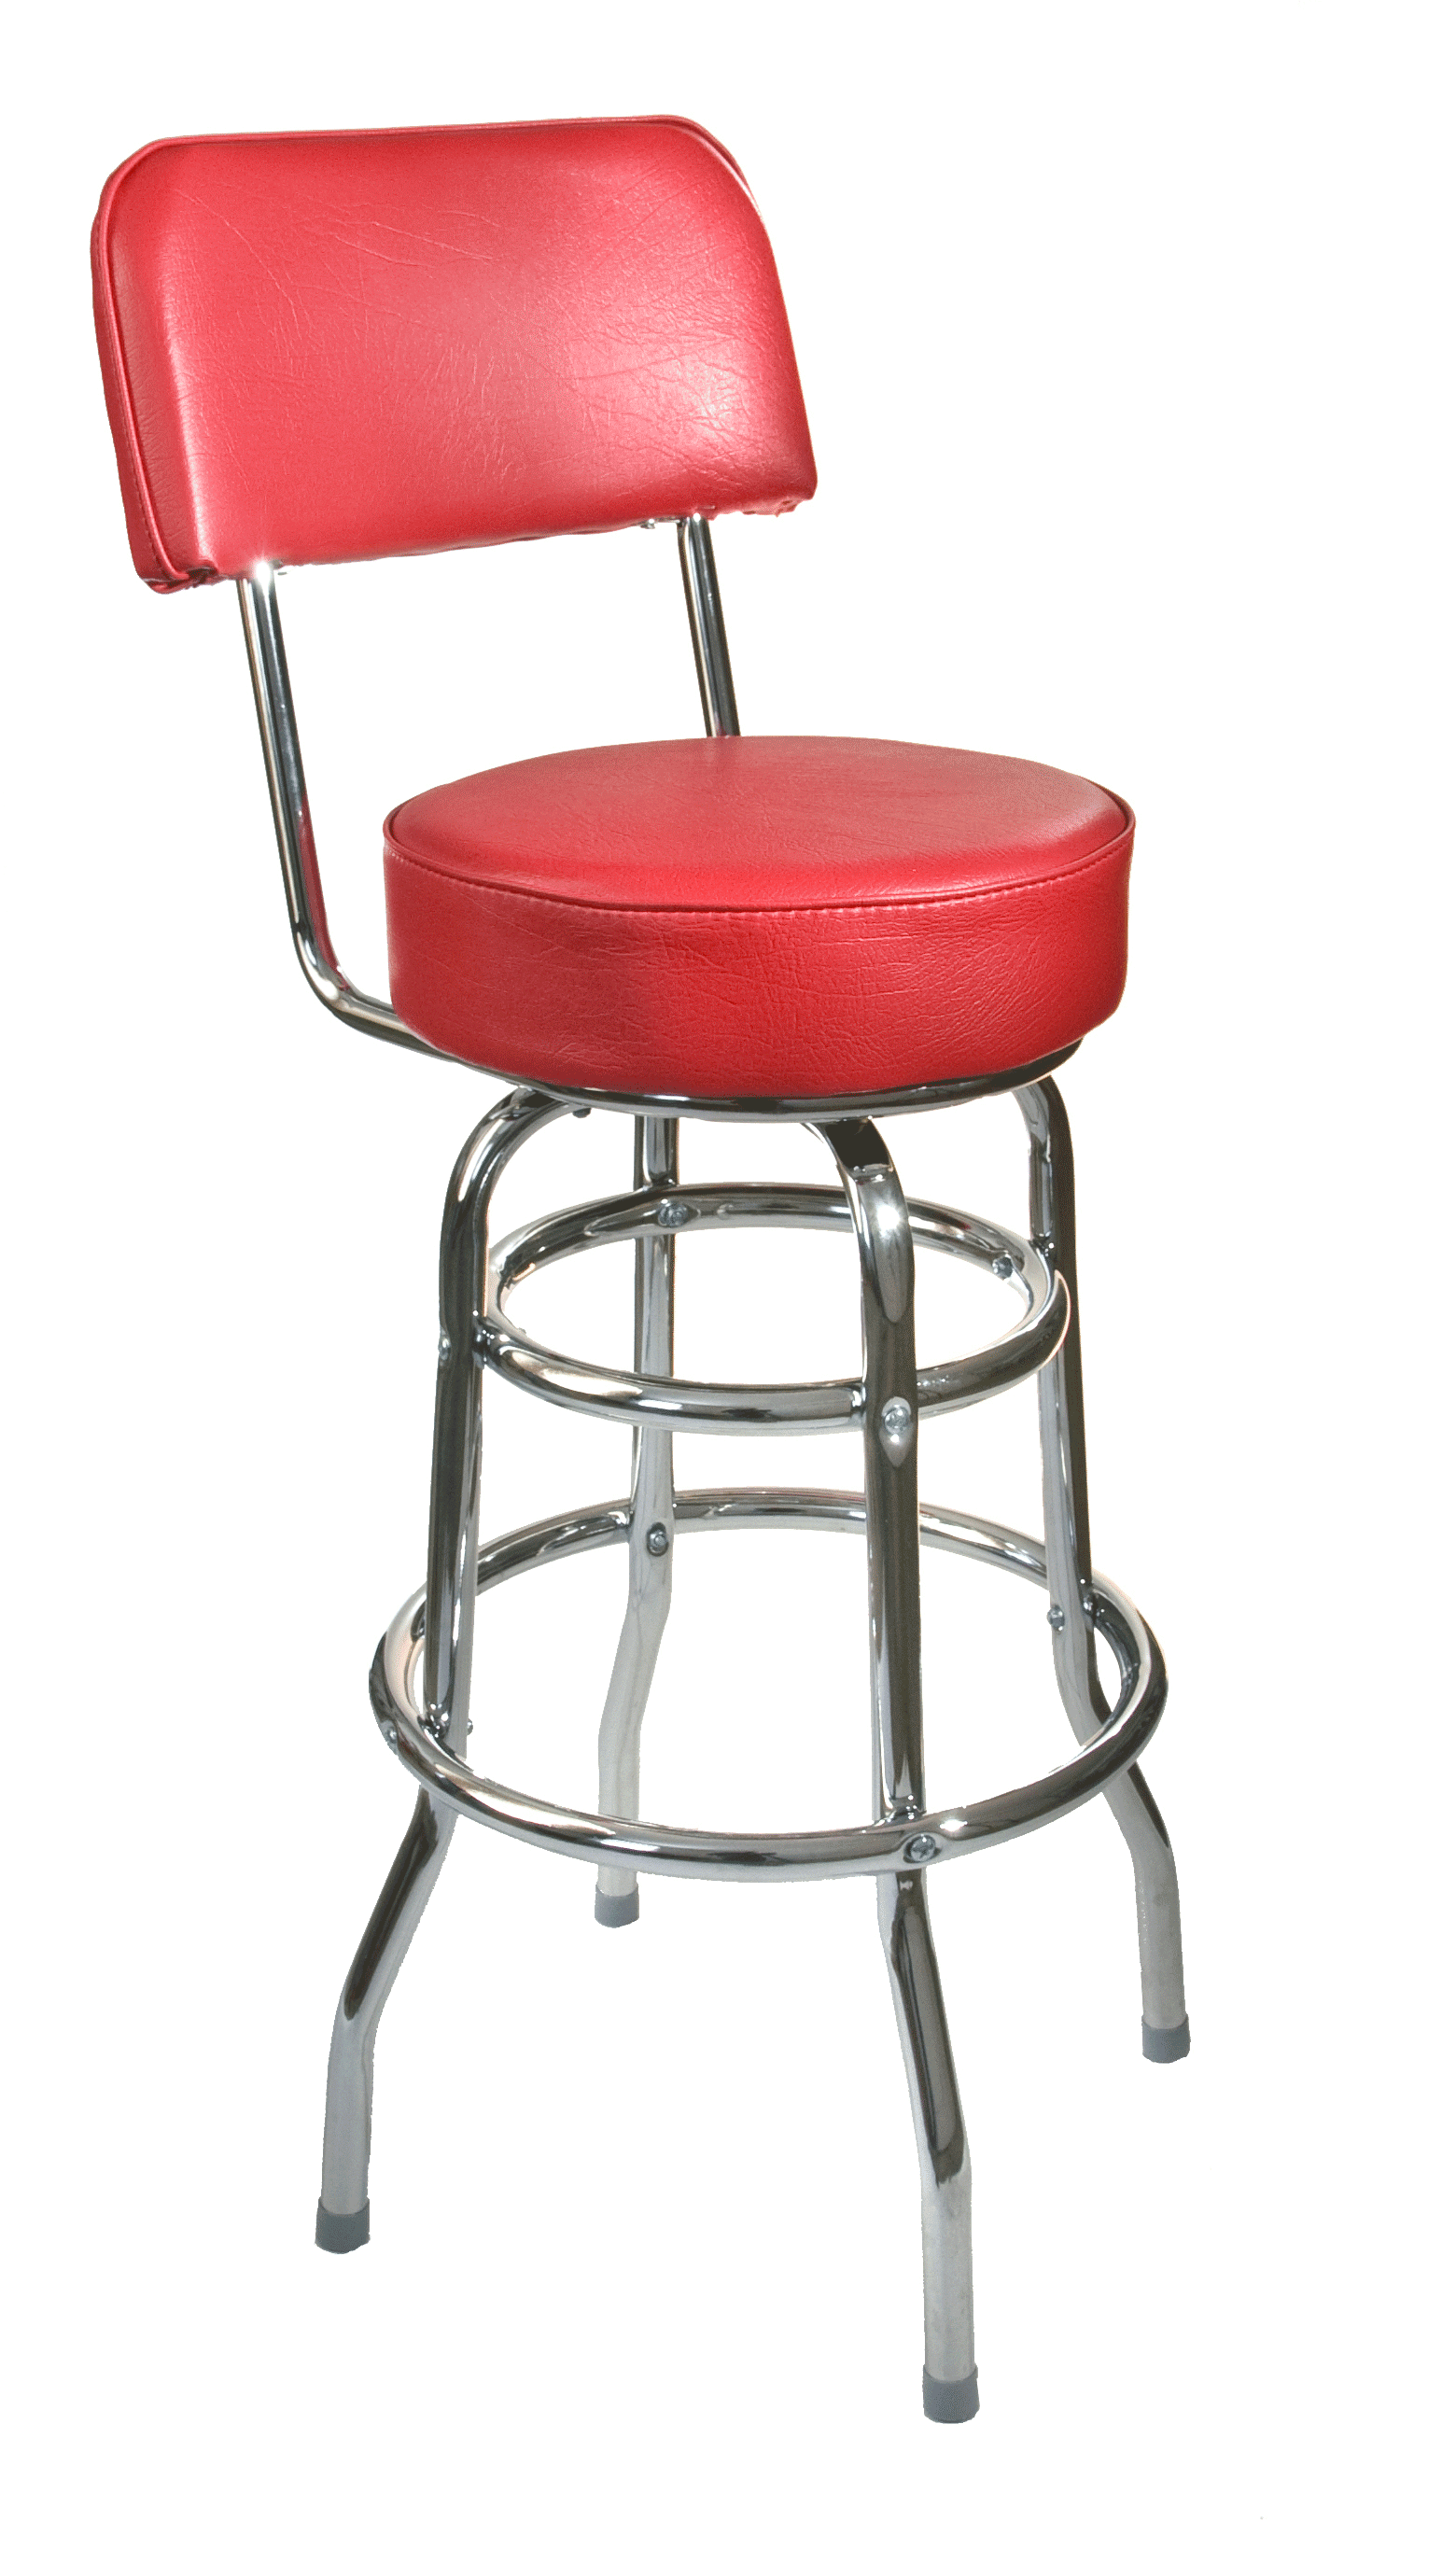 BFM Galena Indoor Restaurant Double Ring Chrome Barstool w/Back